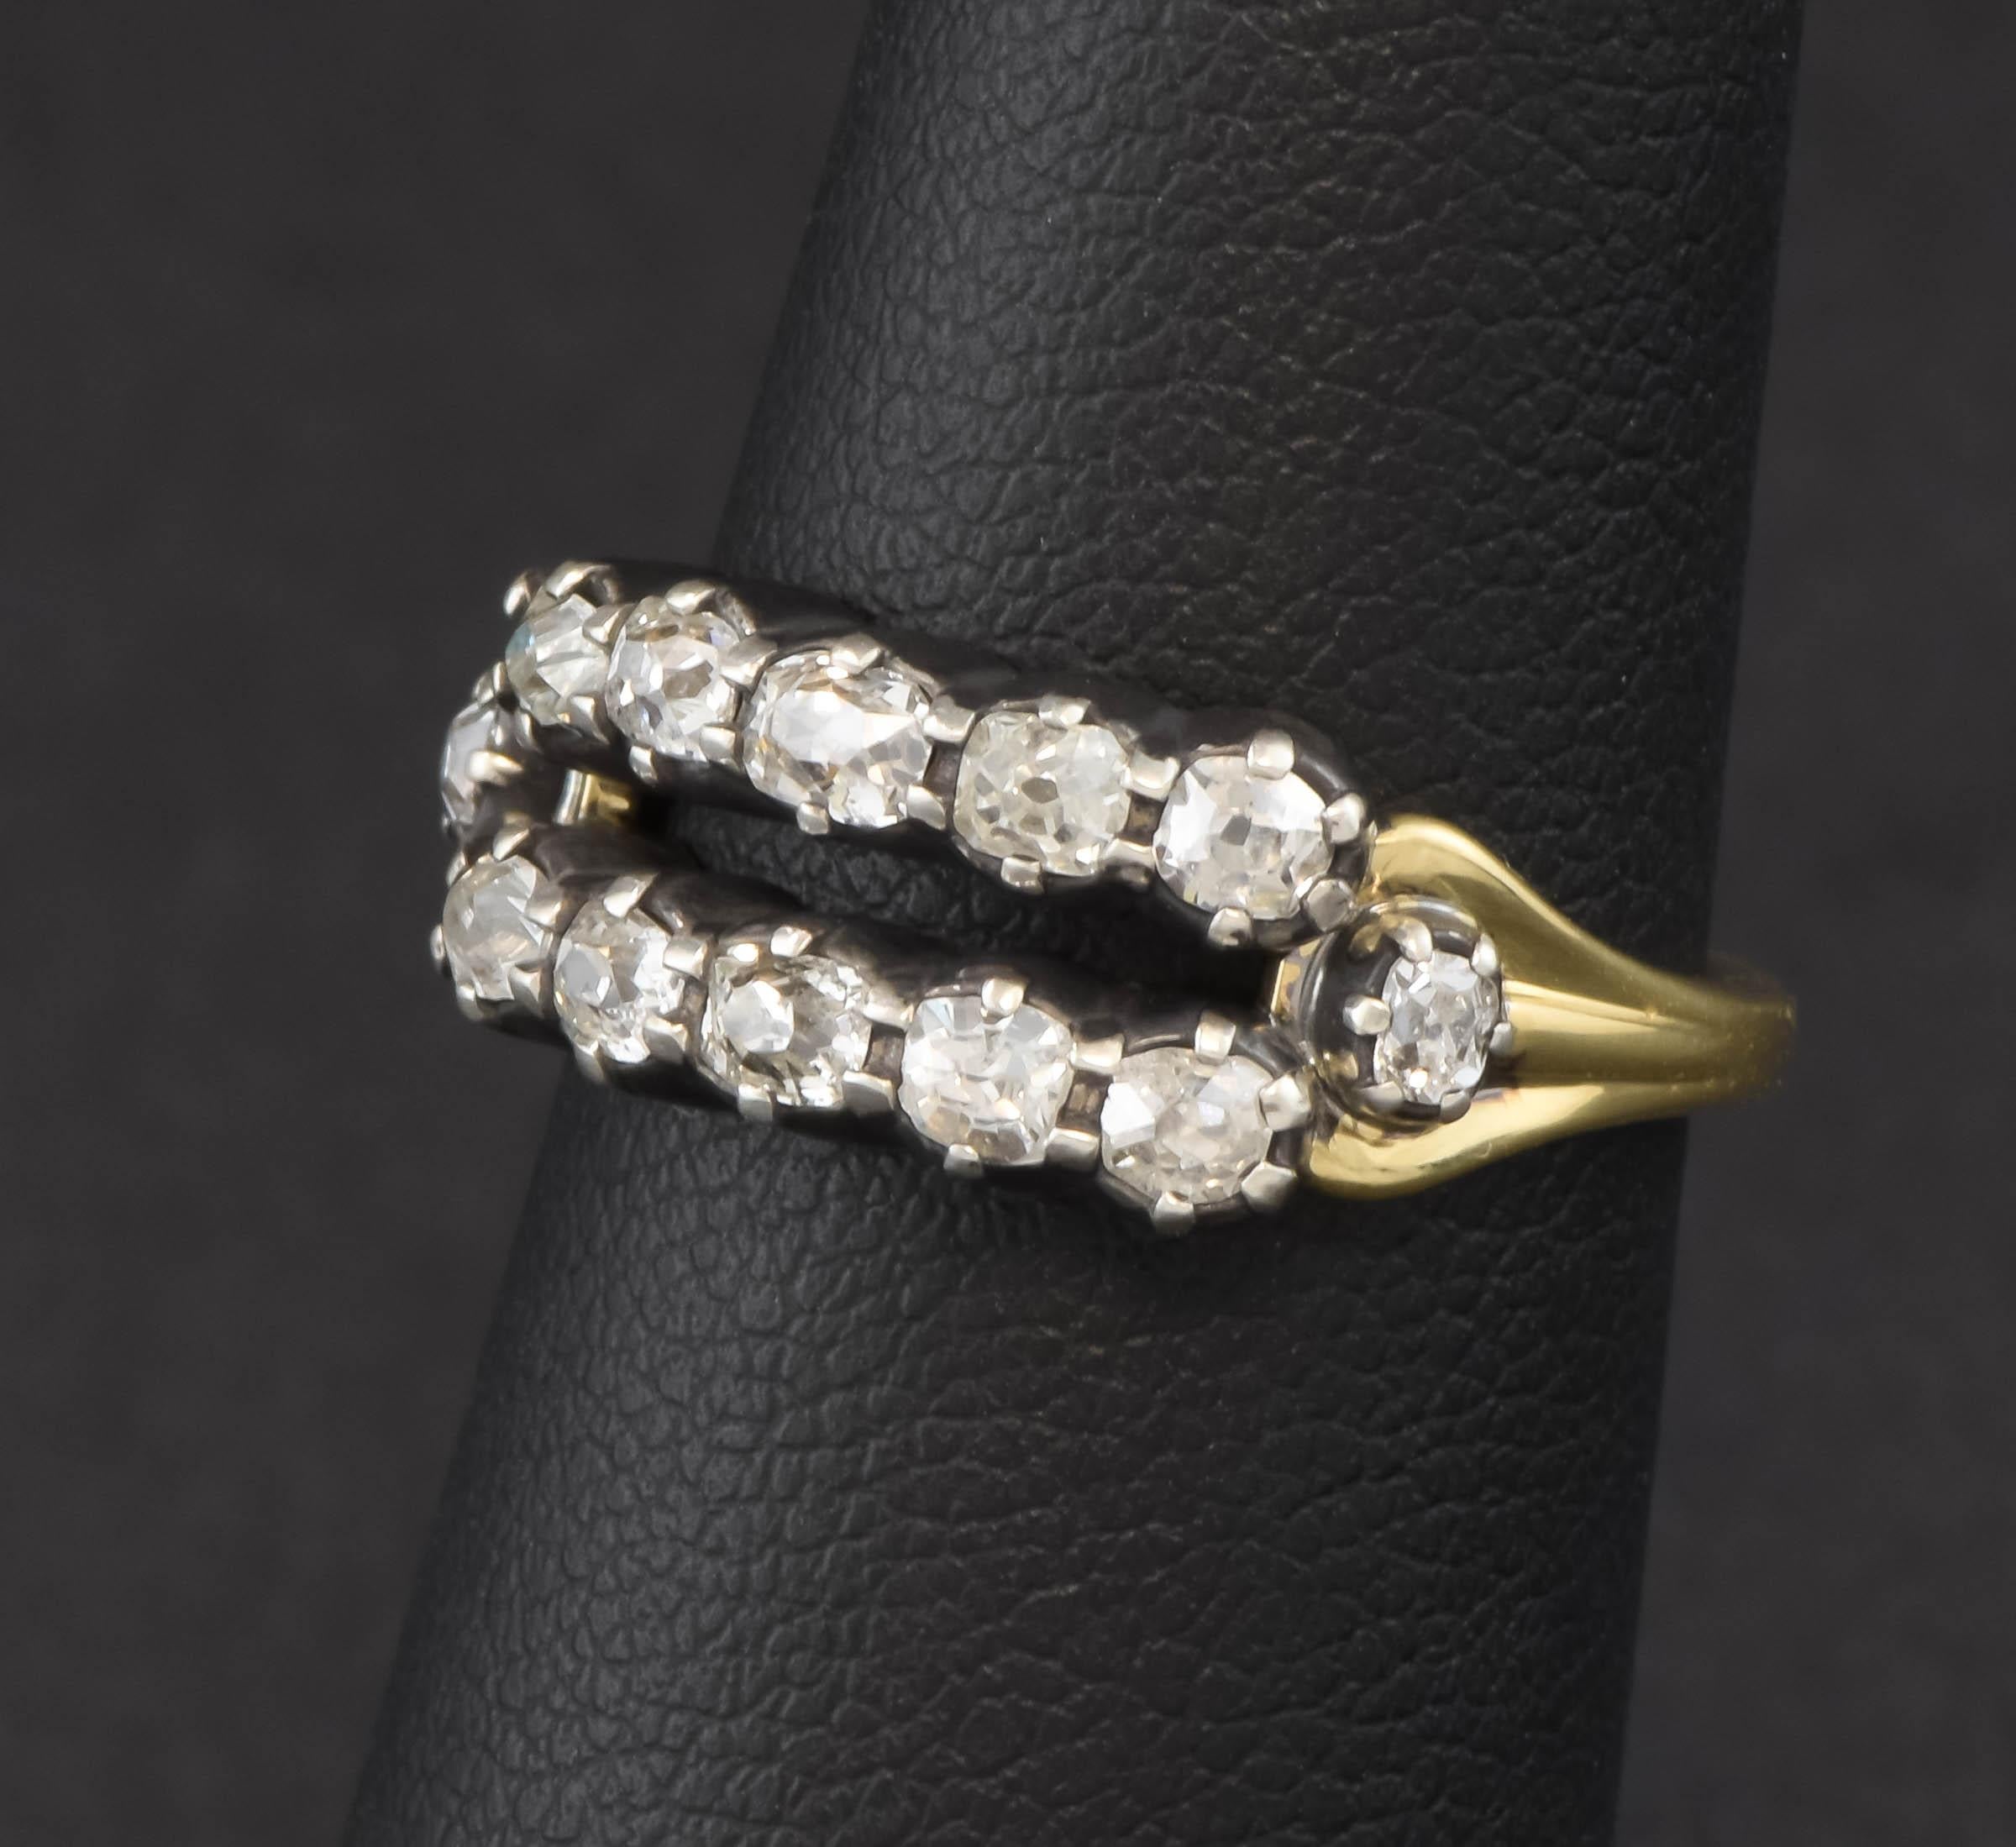 Georgian Double Row Ring with Antique Diamonds - Wedding, Anniversary or Stacking Band For Sale